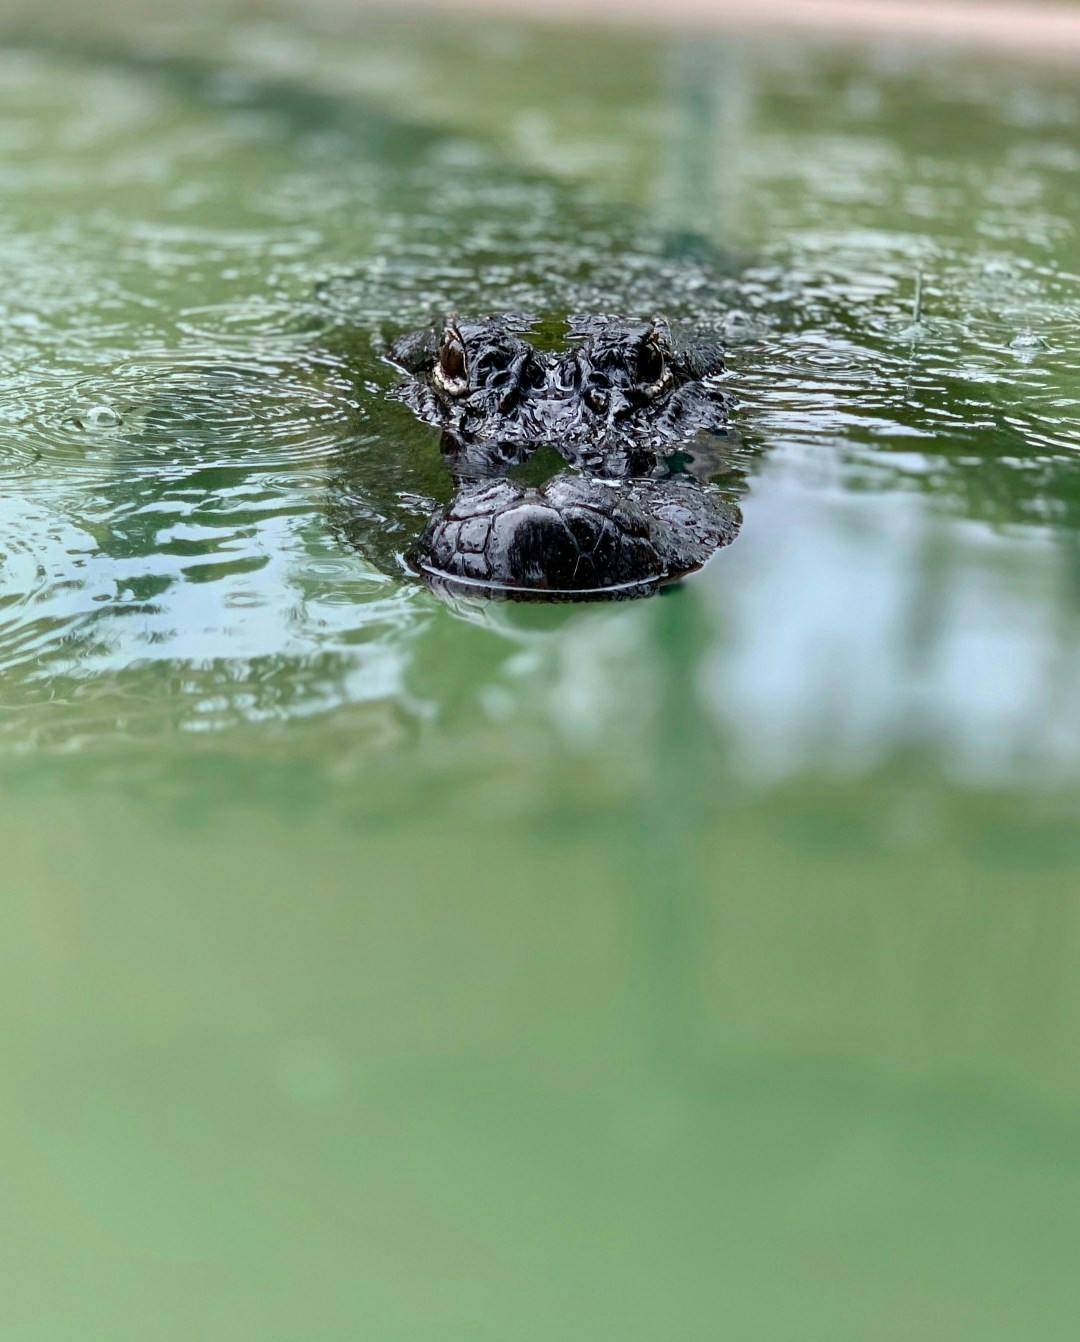 A florida aligator in the water